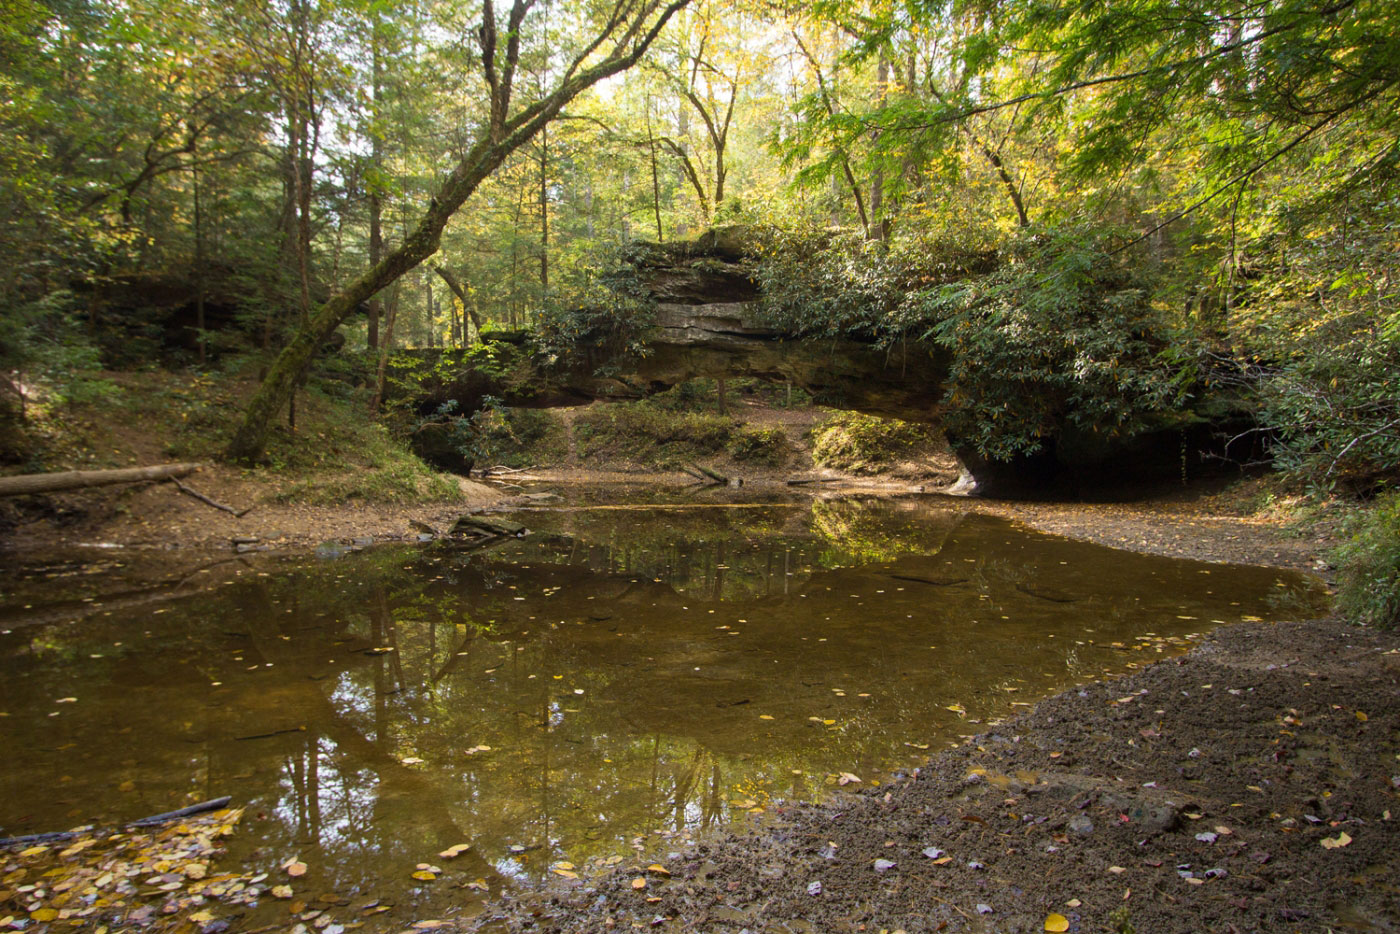 Hike Rock Bridge and Turtle Back Arch in Daniel Boone National Forest, Kentucky - Stav is Lost